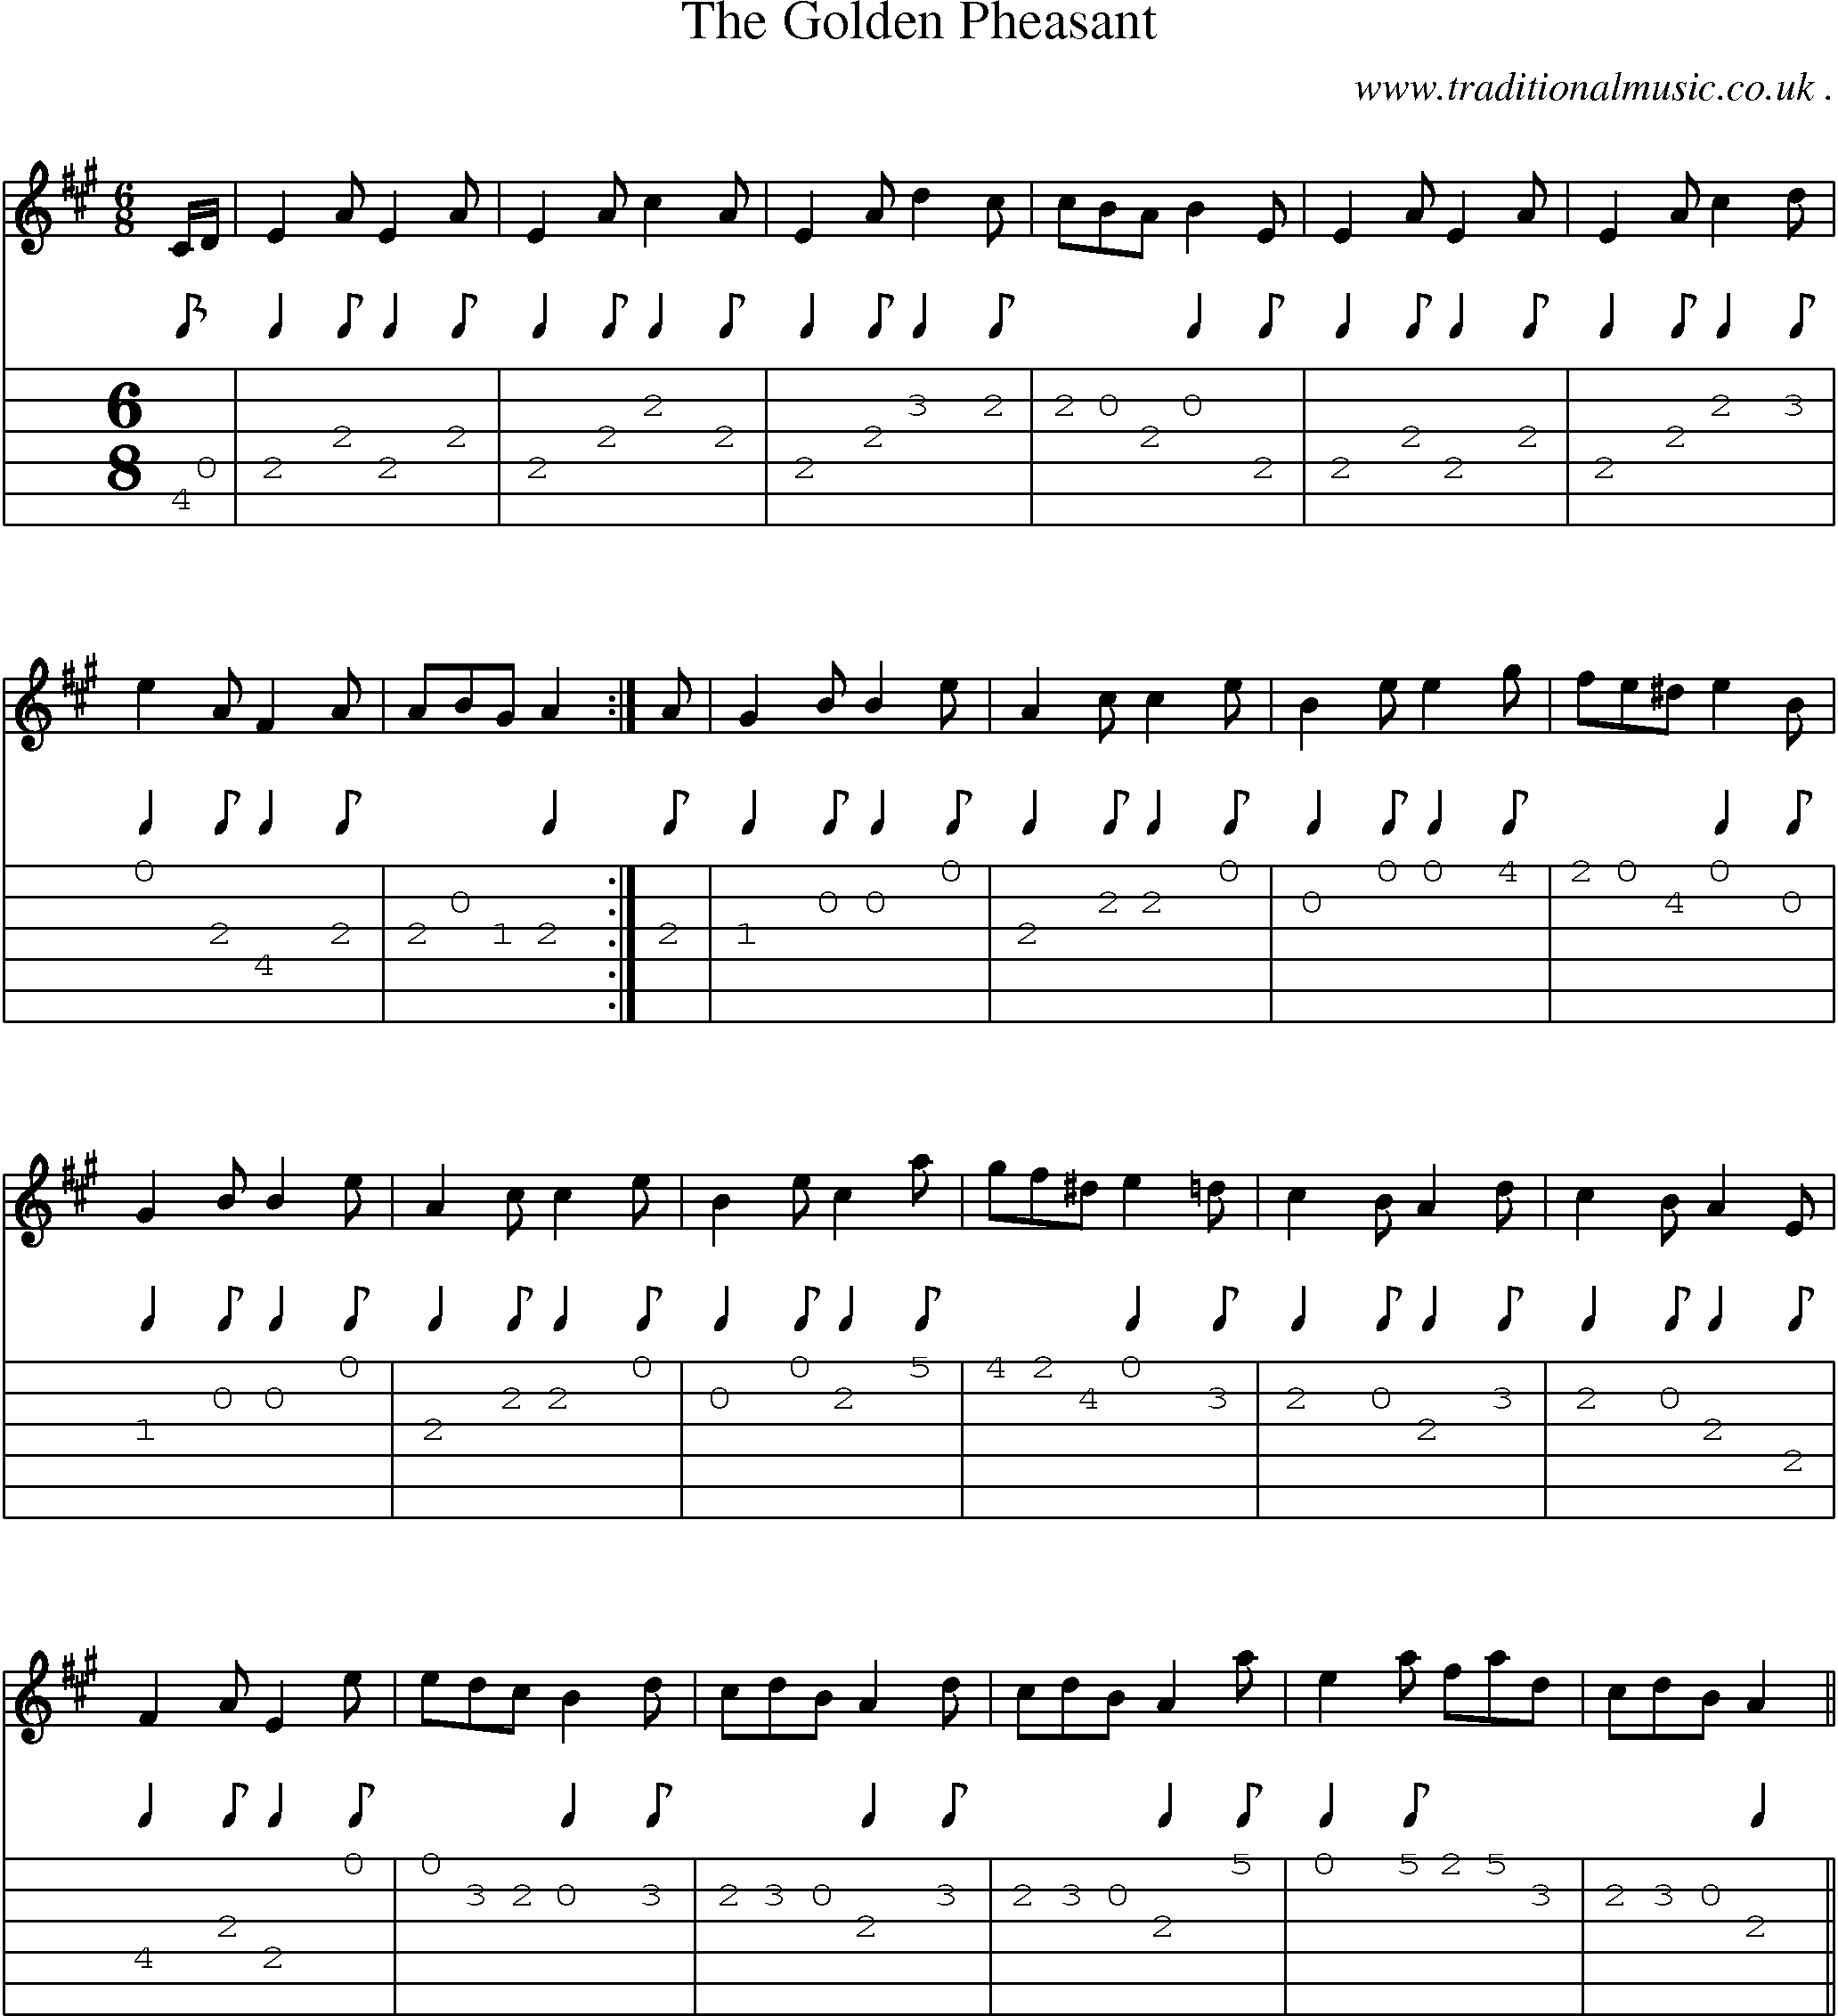 Music Score and Guitar Tabs for The Golden Pheasant